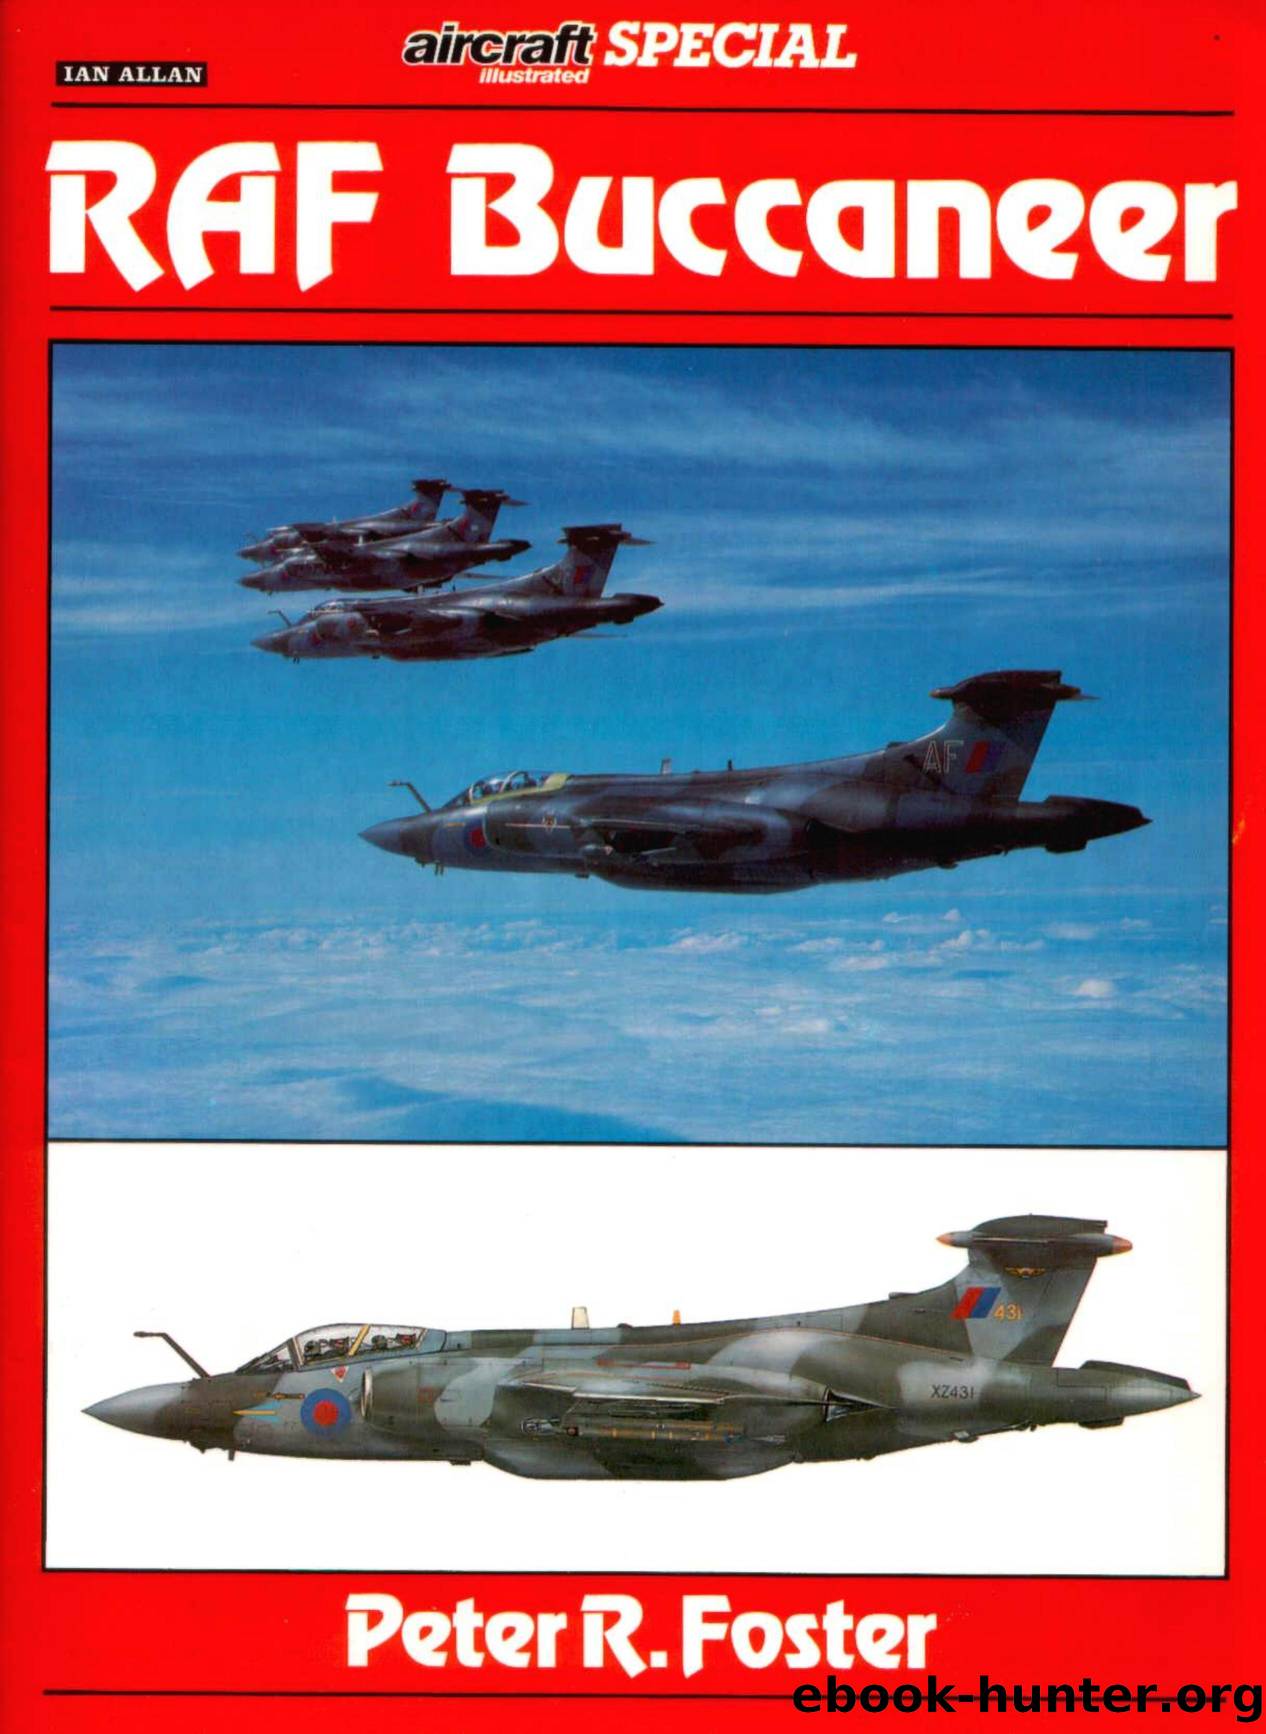 Ian Allan - Aircraft Illustrated Special by RAF Buccaneer